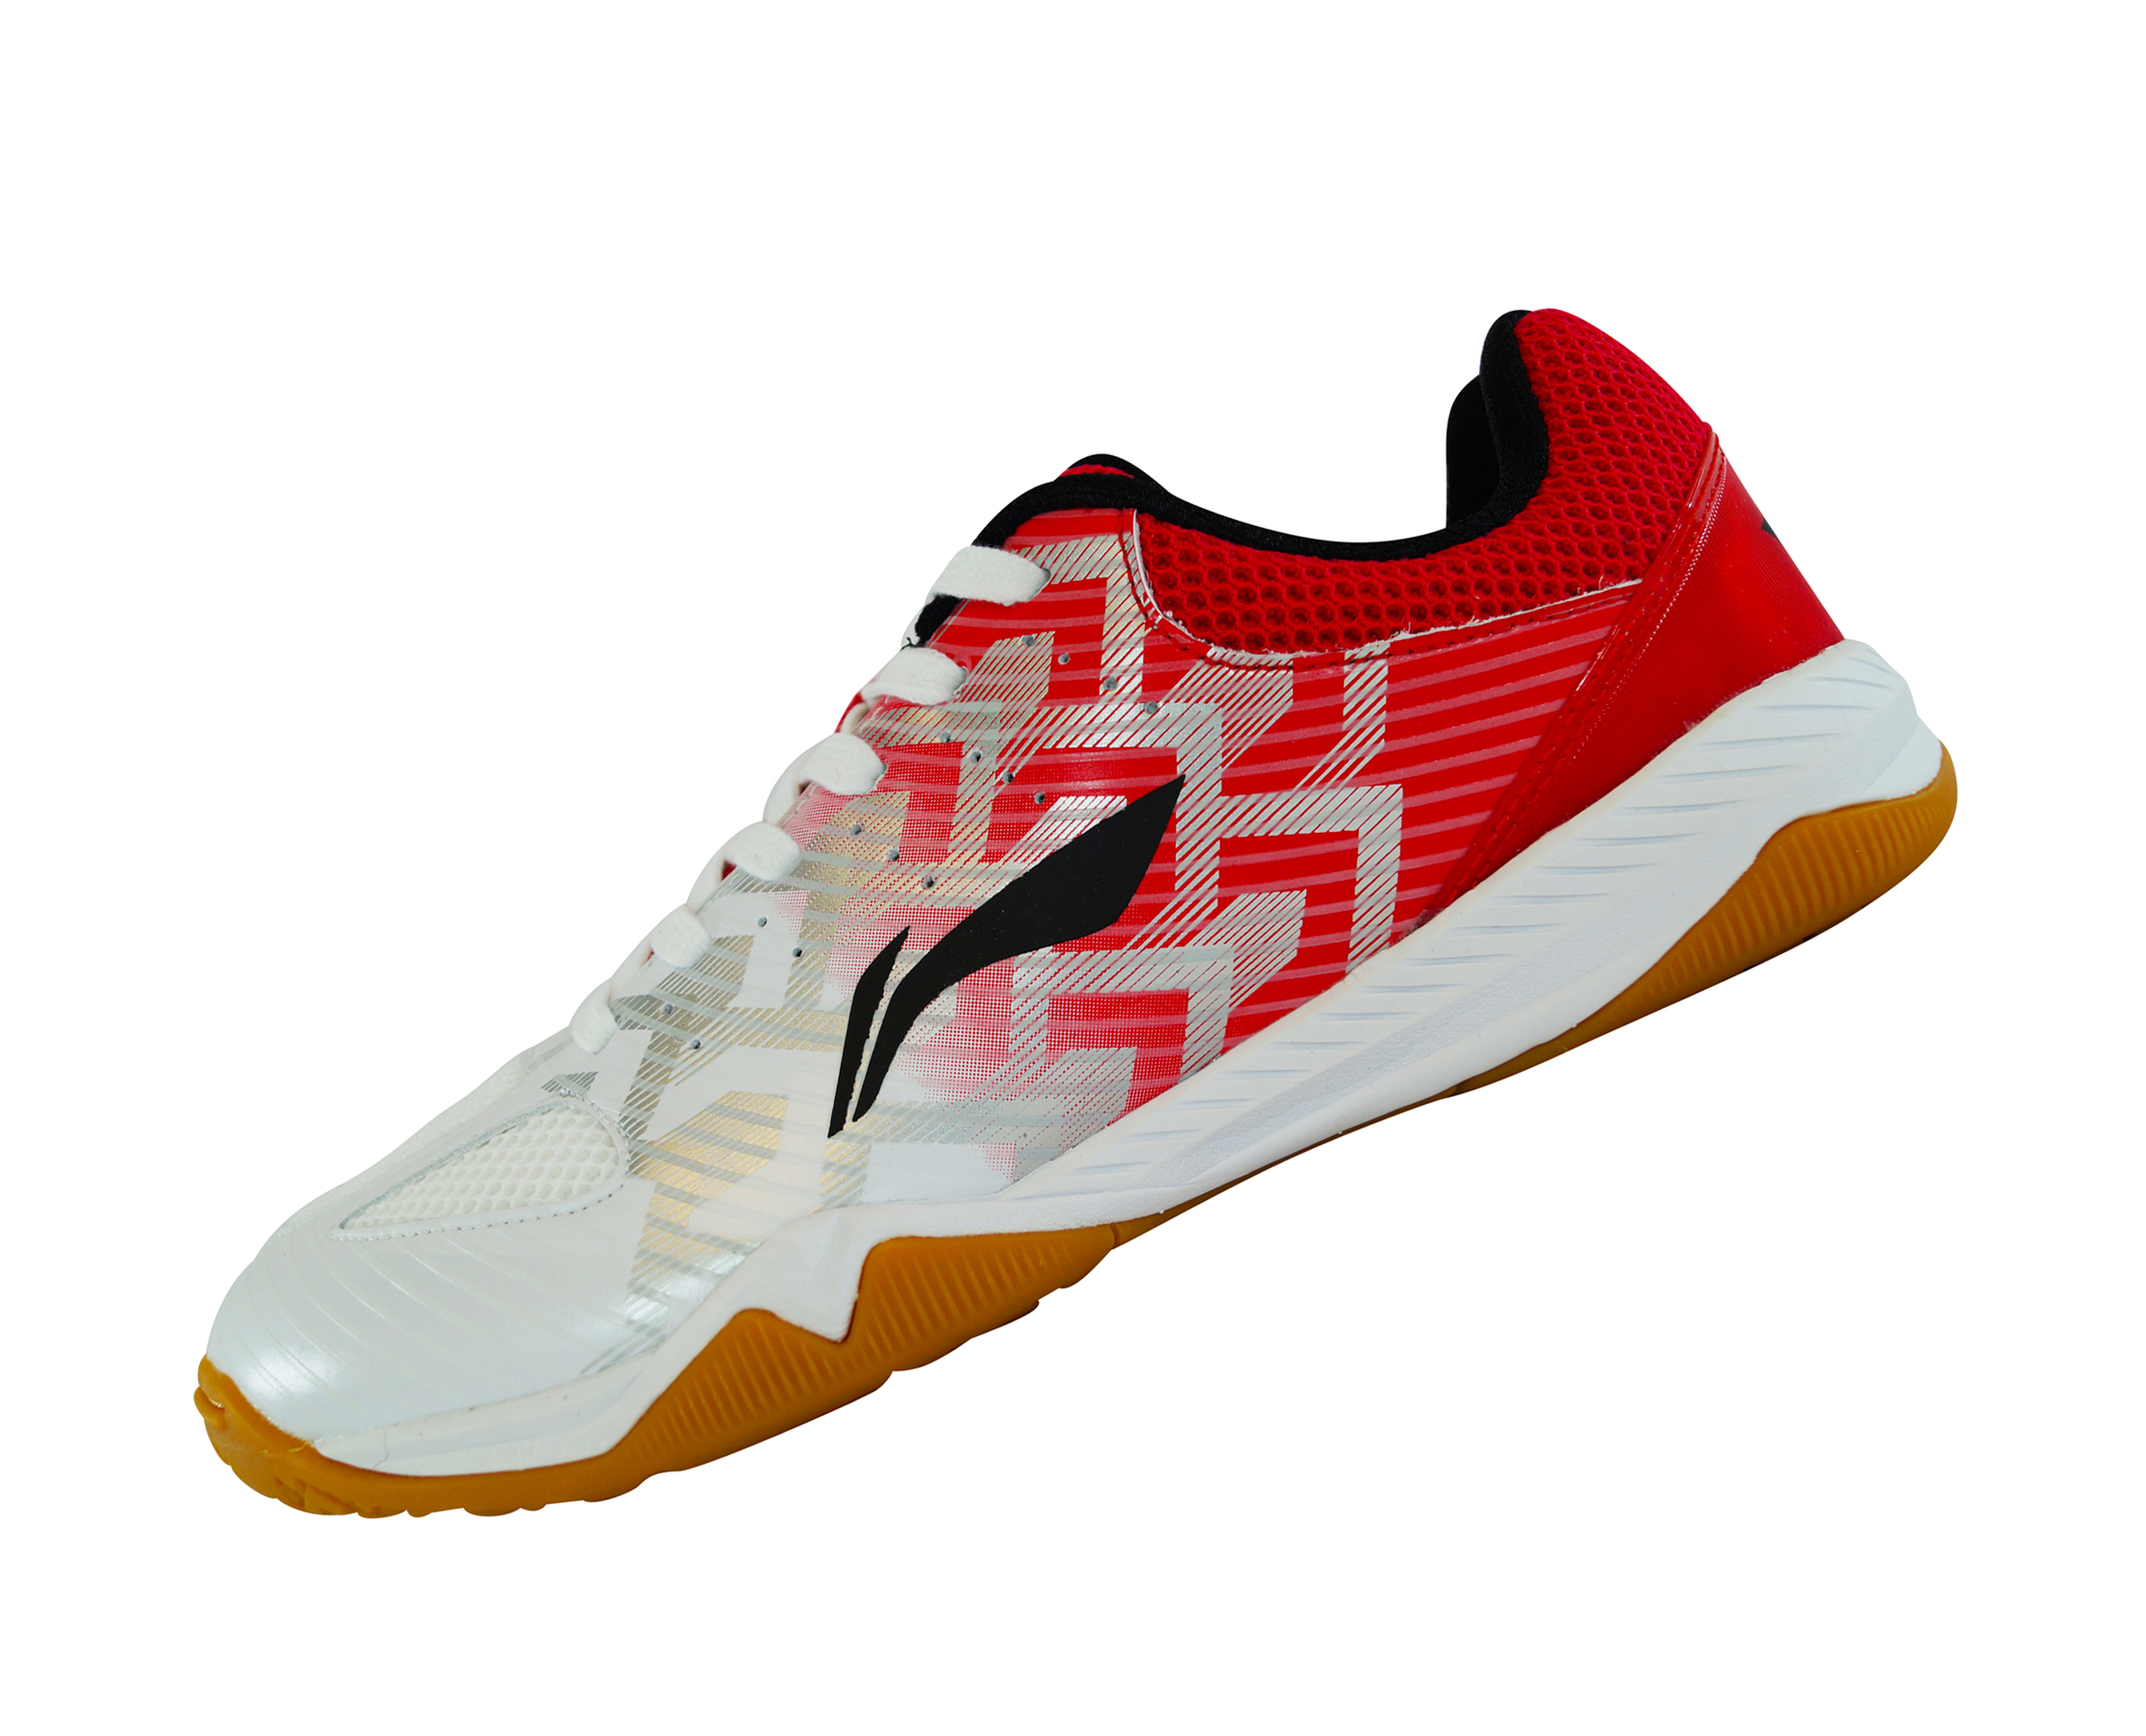 table tennis shoes